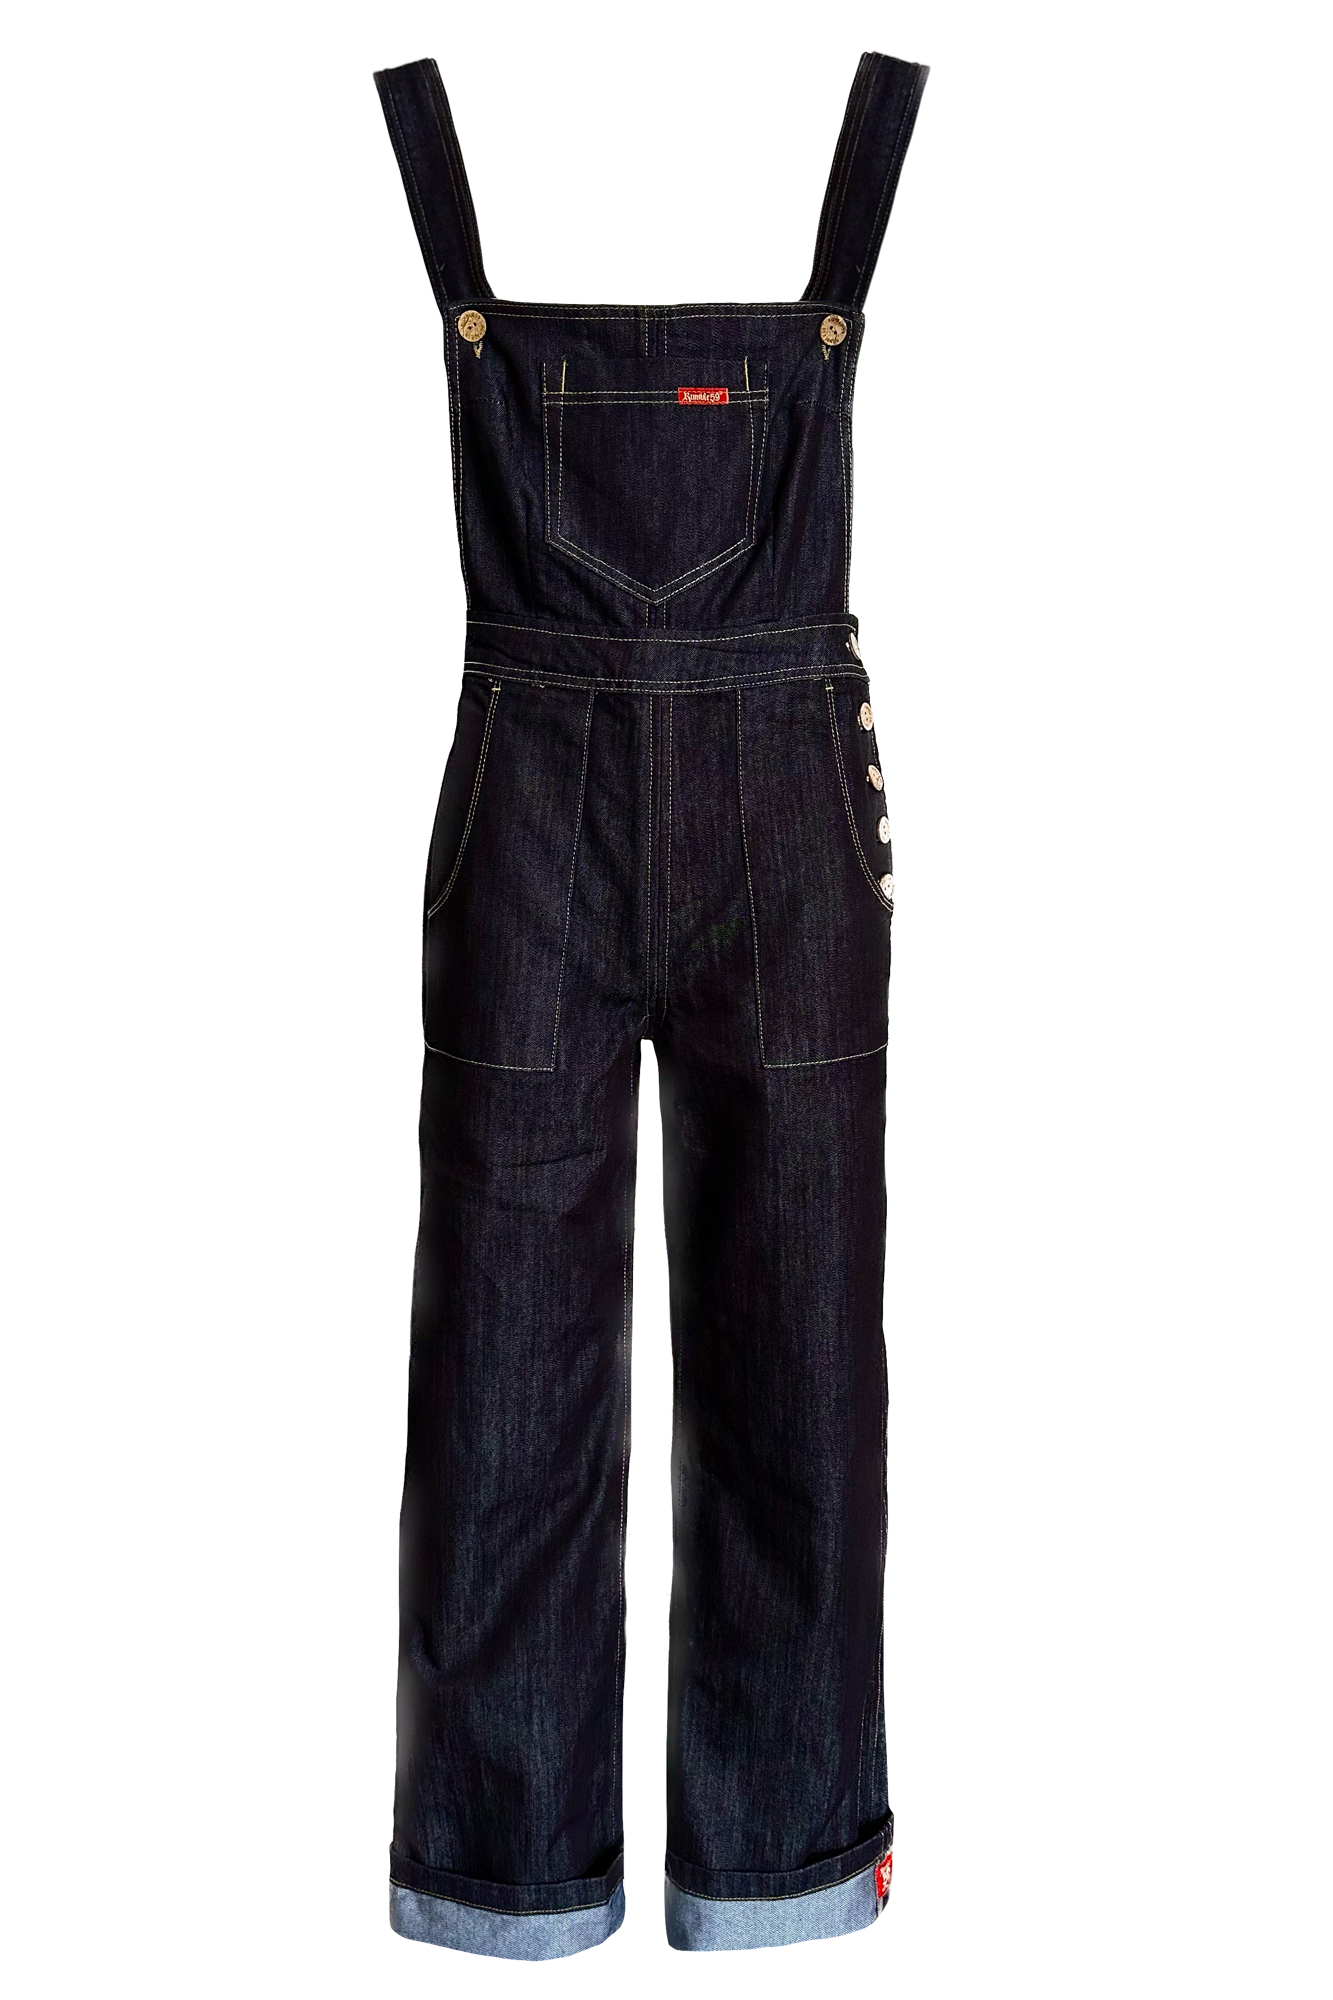 Rumble59 Jeans Overalls